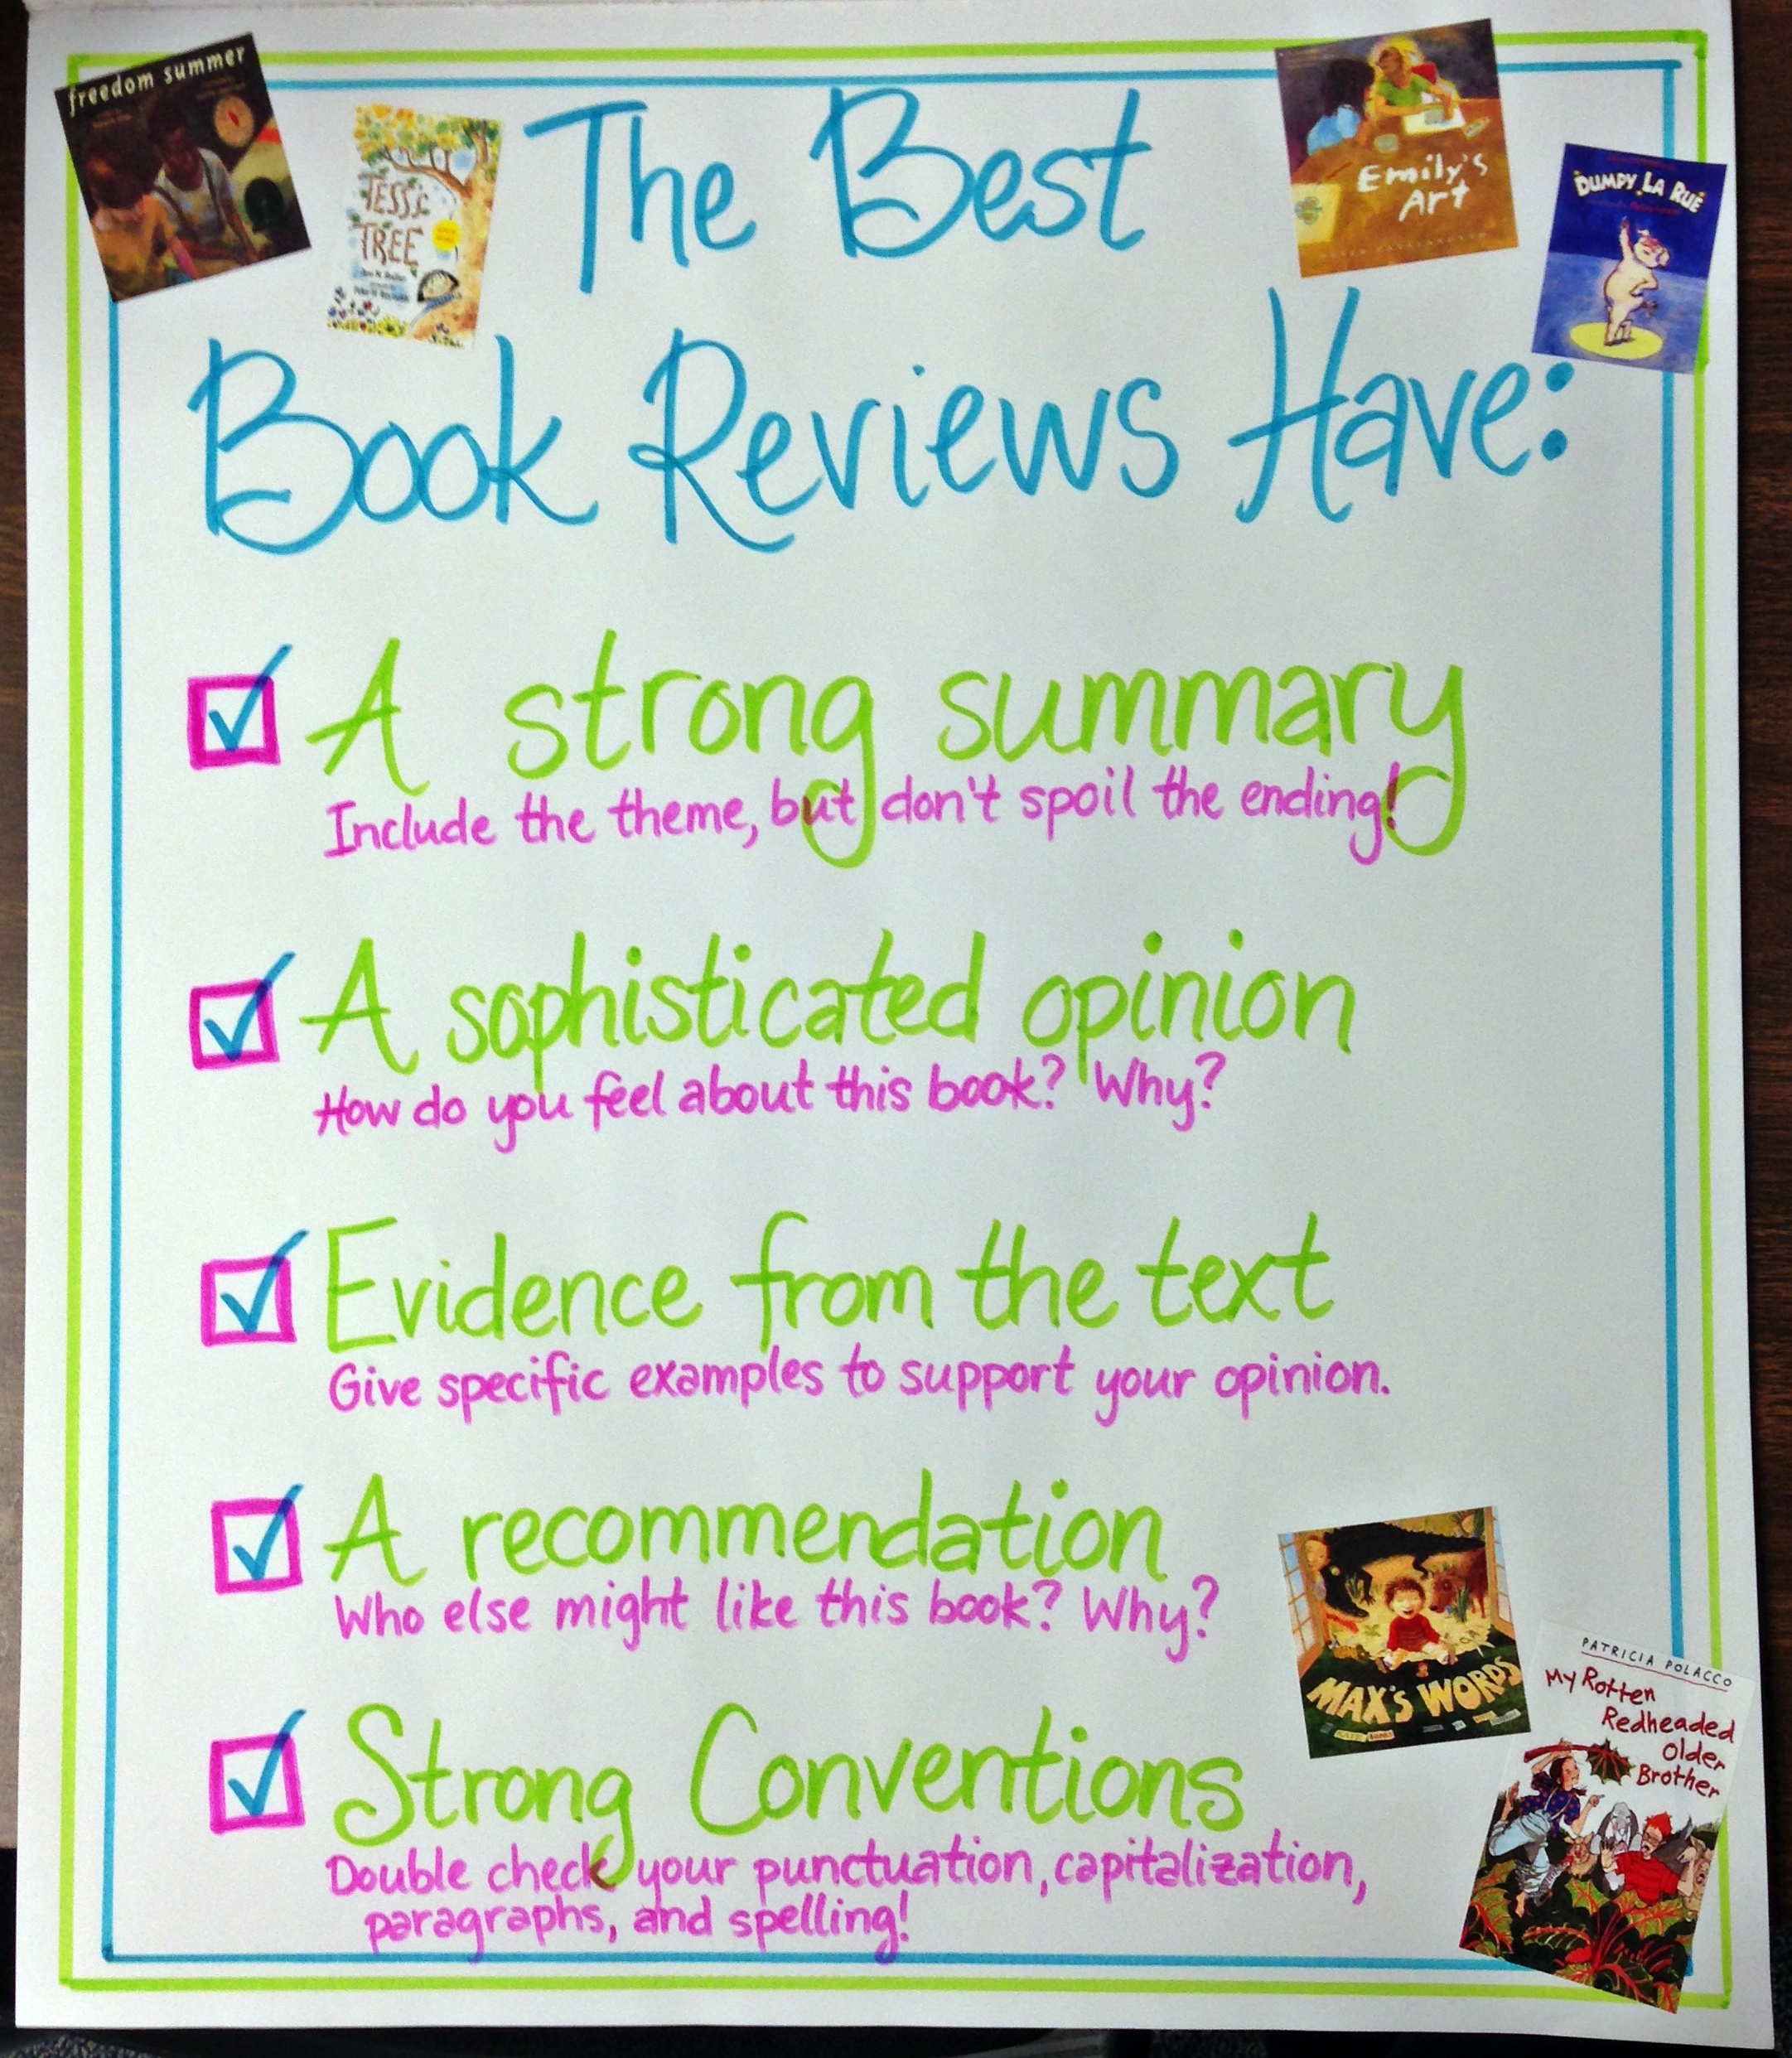 bookreview